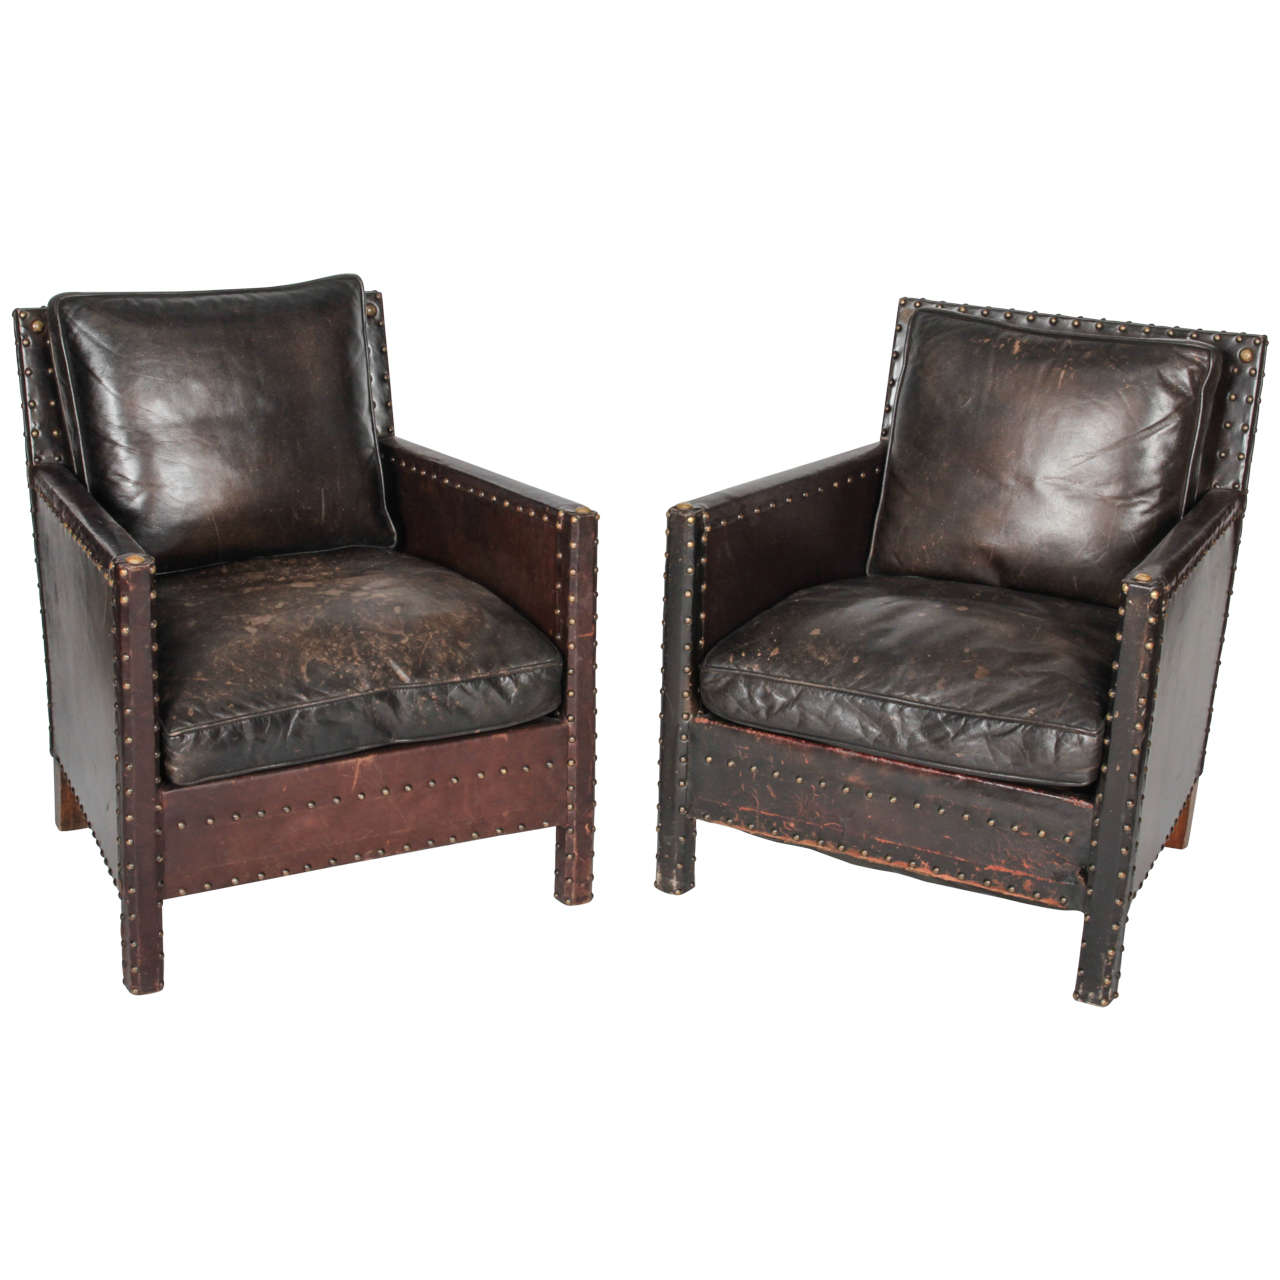 Pair of Early 20th Century Leather Club Chairs